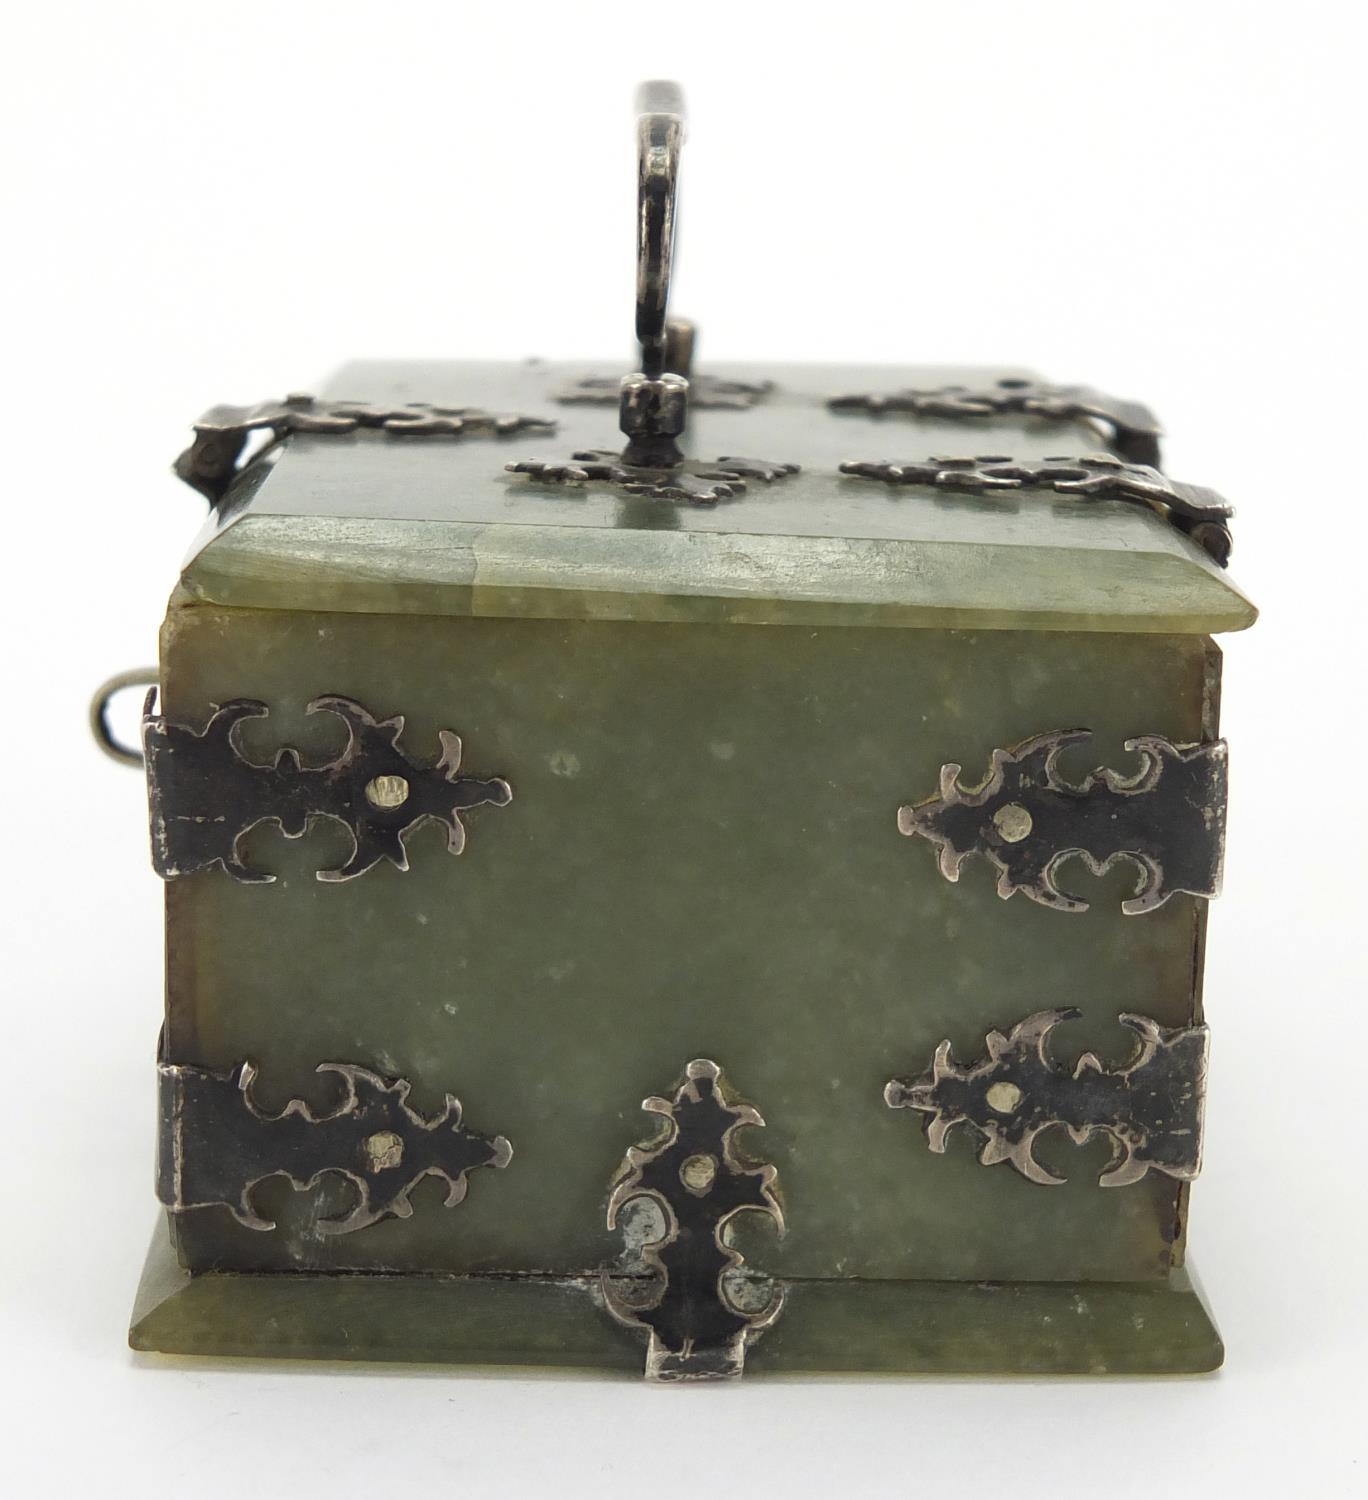 19th century Indian Mughal green jade casket, with silver mounts and swing handle, 5cm H x 9cm W x - Image 4 of 8